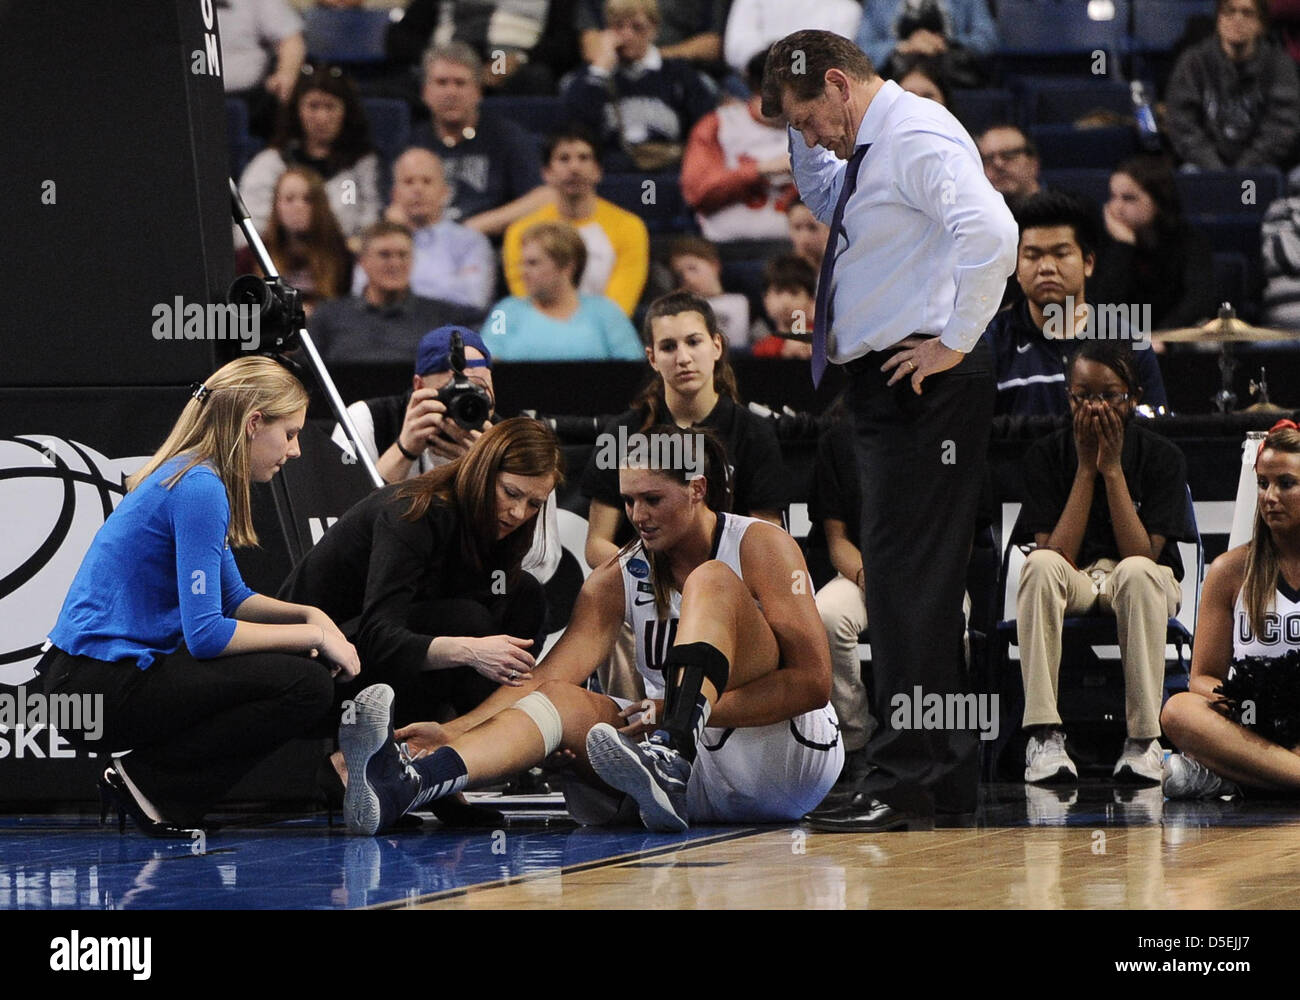 March 30, 2013 - Bridgeport, CT, USA - Saturday March 30, 2013: Connecticut Huskies Head coach Geno Auriemma stands over watching as Connecticut trainer Rose Mary Ragle tends to Connecticut Huskies center Stefanie Dolson (31) during the 1st half of an NCAA Womens Basketball Tournament, Bridgeport regional semi-final game between Maryland vs Connecticut at Webster Bank Arena in Bridgeport, CT. Connecticut went on to win 76-50 over Maryland. Bill Shettle / Cal Sport Media. Stock Photo